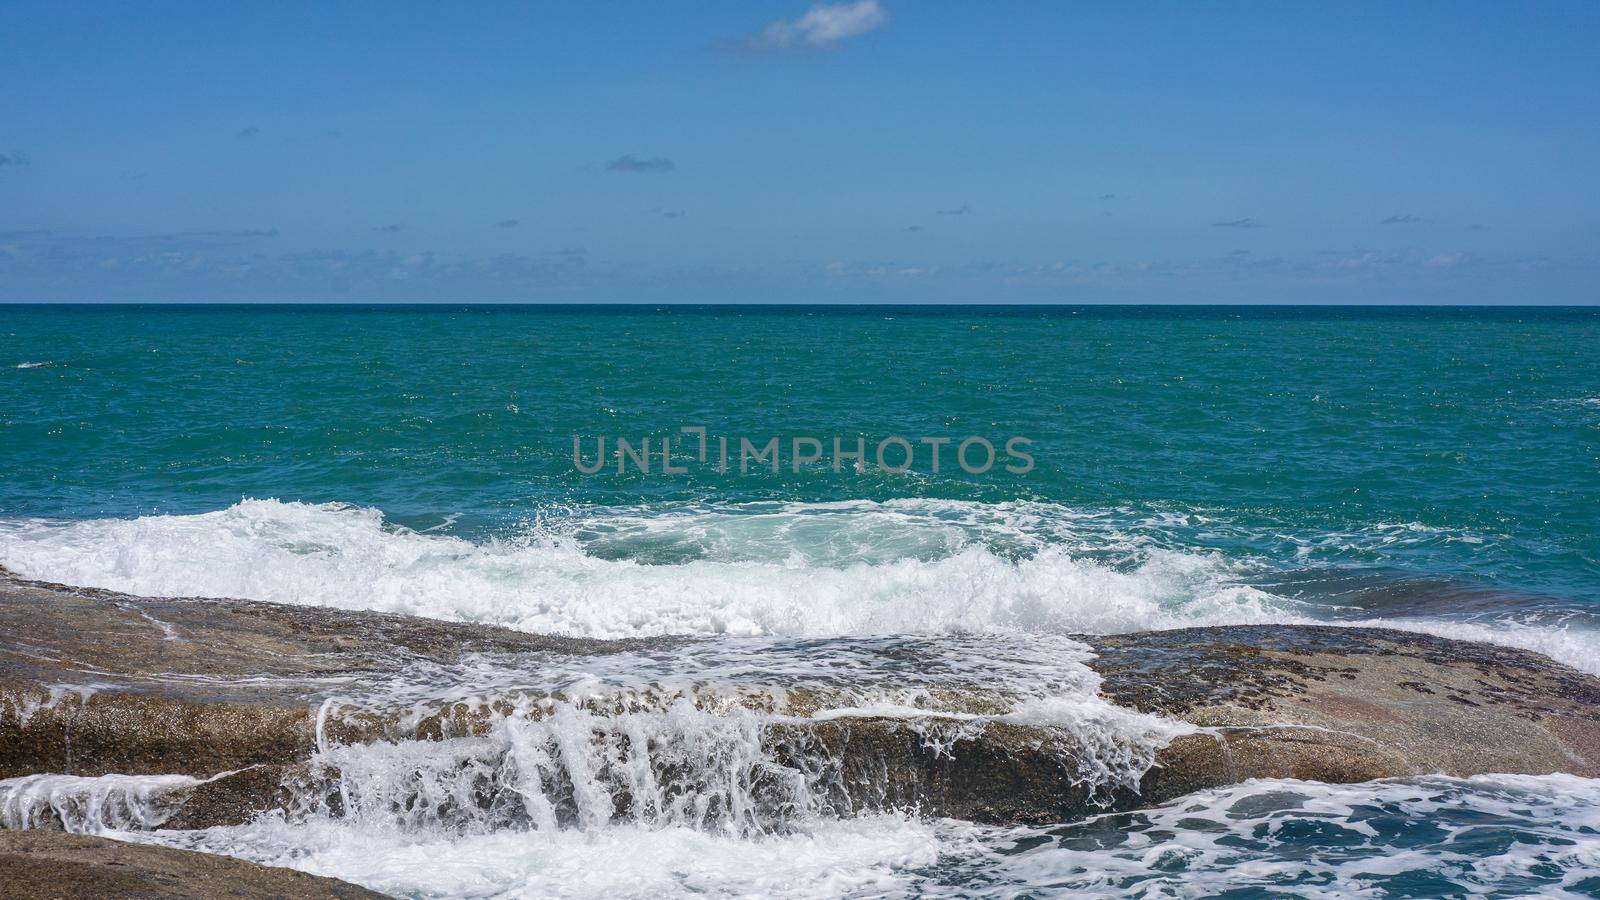 Rocky beach with white waves, deep blue ocean views and blue sky.